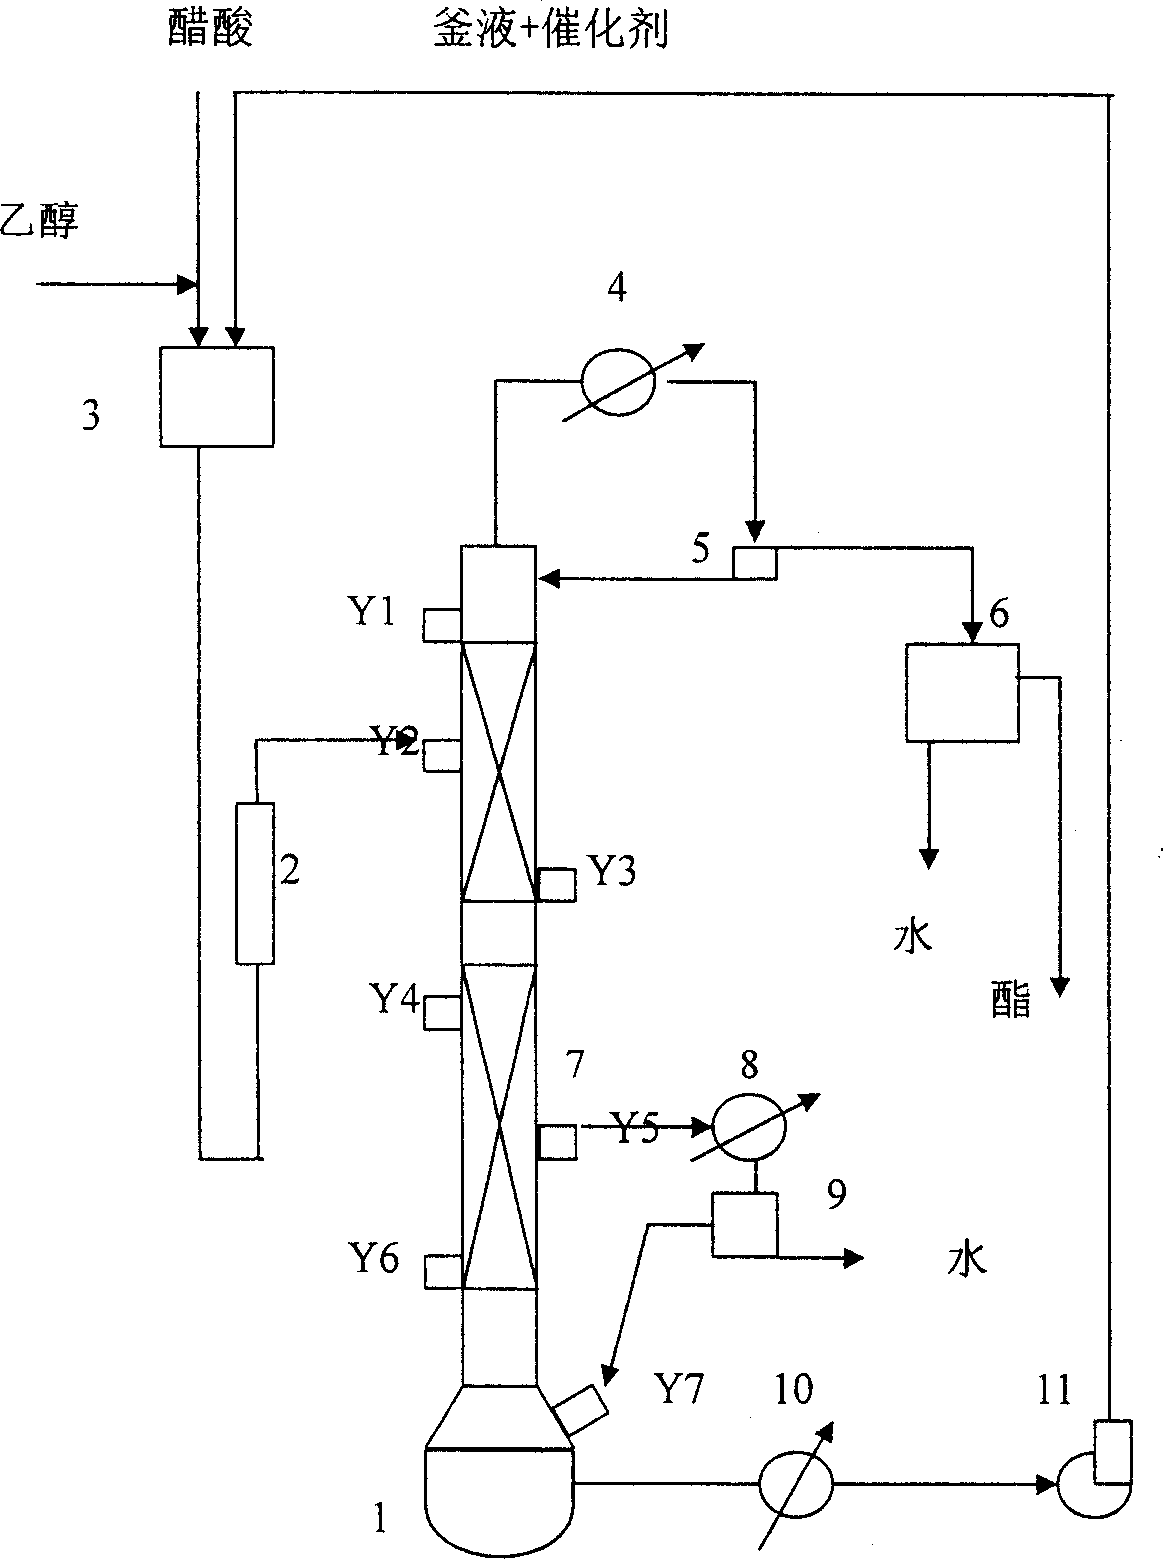 Method and apparatus for continuously preparing ethyl acetate by single tower